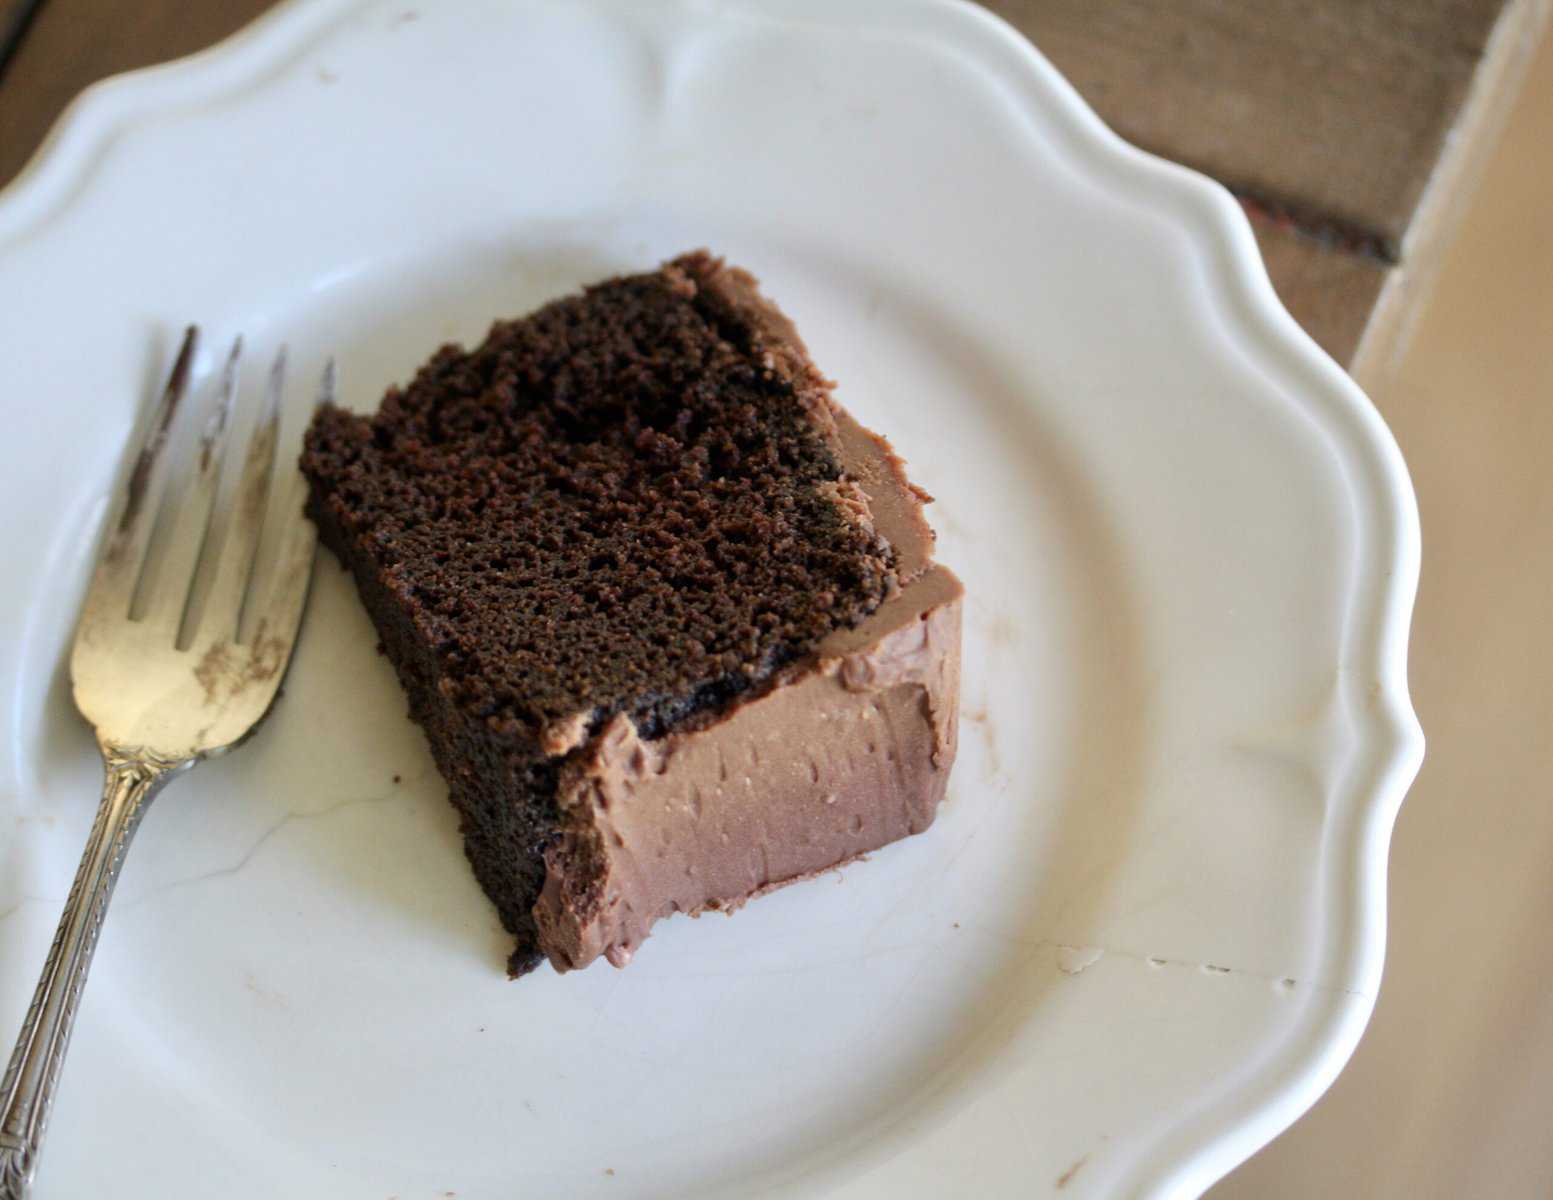 A slice of gluten free chocolate cake on a white plate.